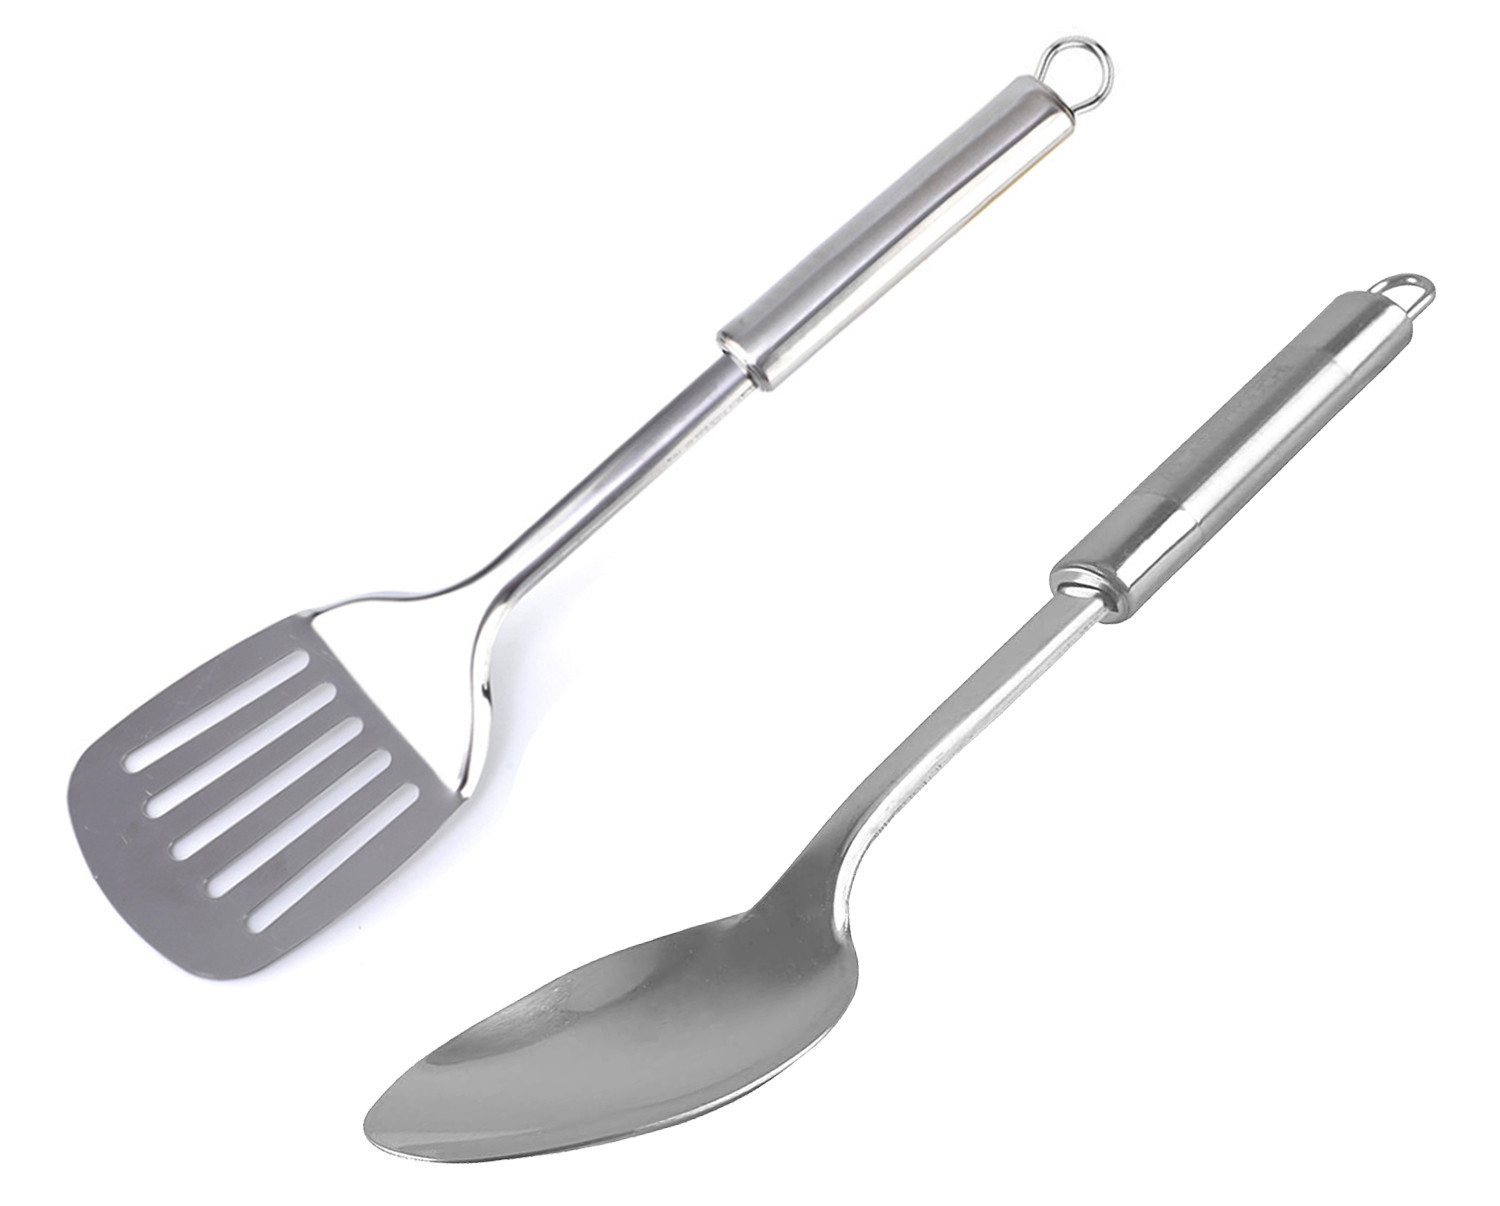 Kuber Industries Stainless Steel Kitchen Utensil Set of 2 (Slotted Turner & Solid Turner) Cooking Utensils - Nonstick Kitchen Utensils Cookware Set Best Kitchen Gadgets Kitchen Tool Set Gift (Silver)